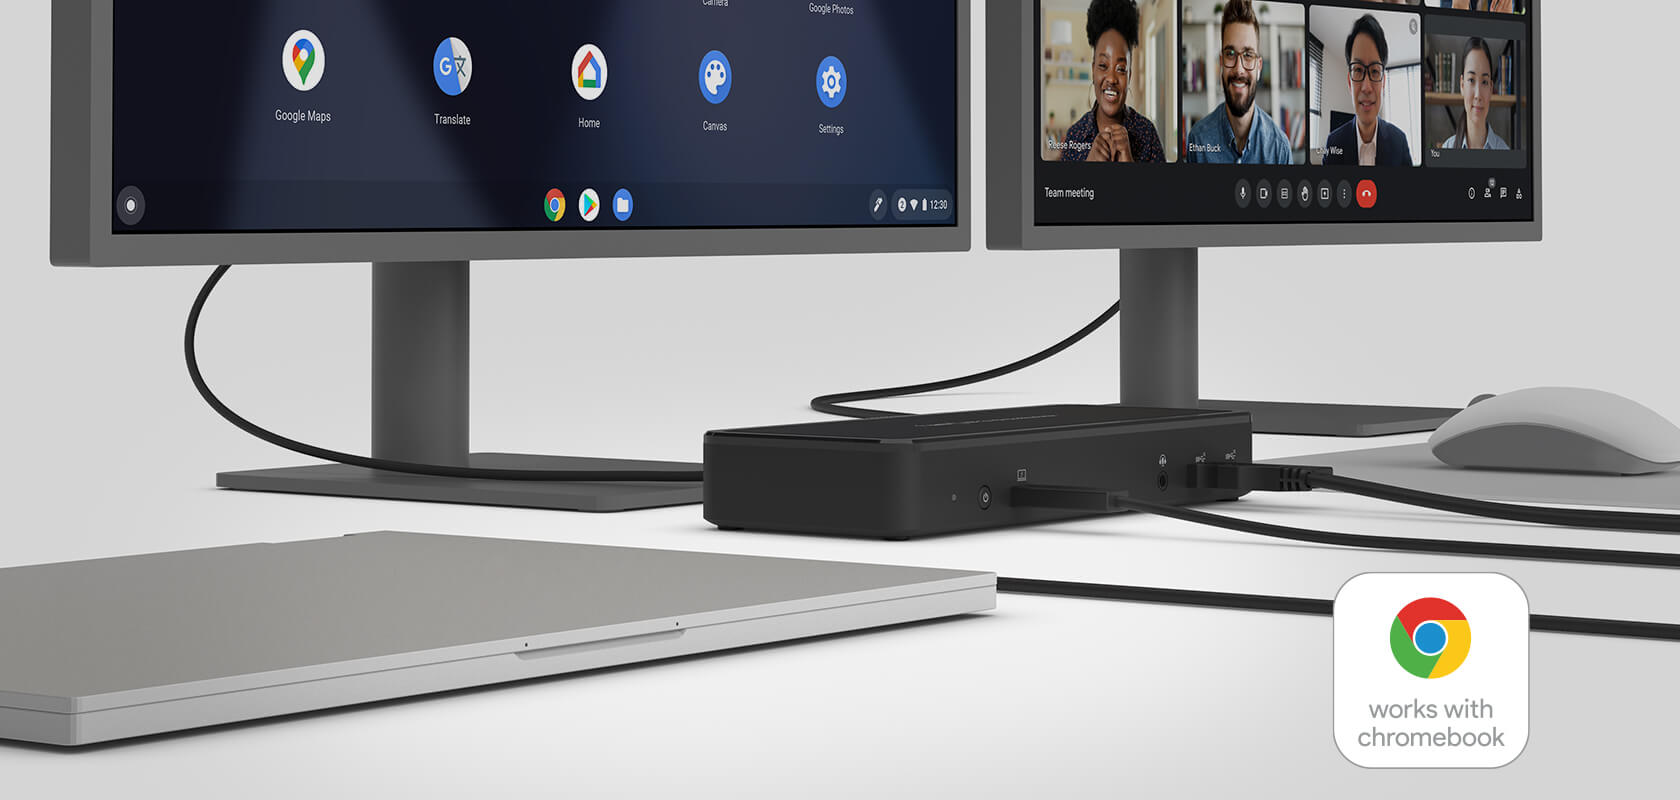 Belkin unveiled a 14-port docking station that is certified for Chrome OS laptops